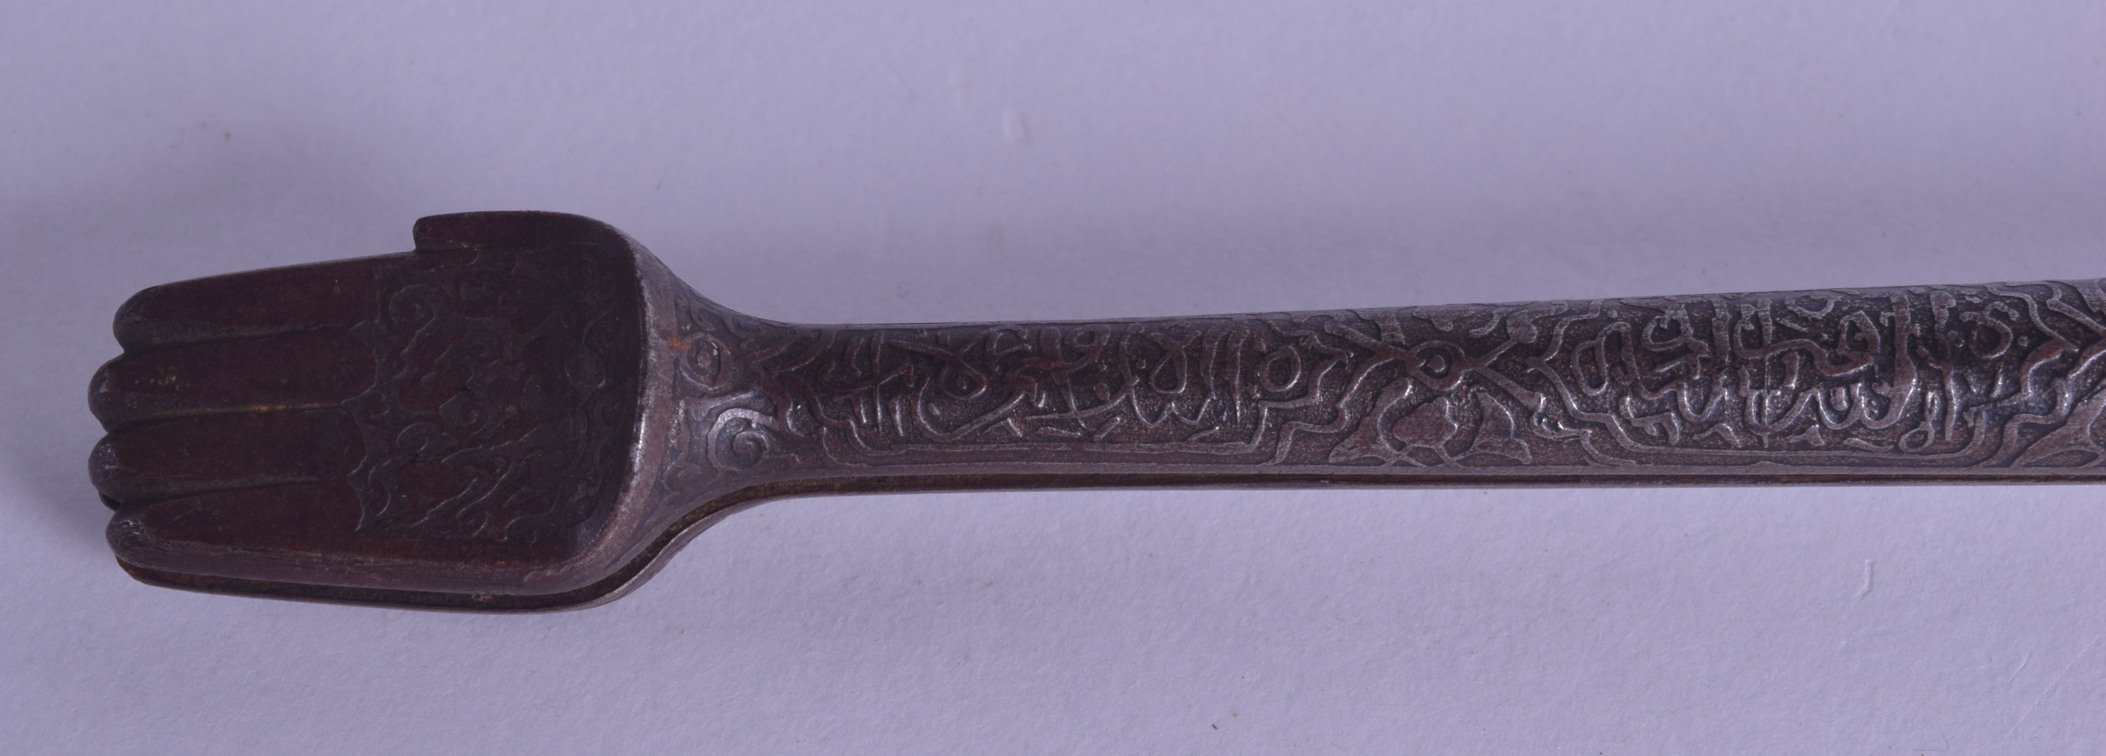 A GOOD 18TH/19TH CENTURY ISLAMIC QAJAR STEEL SUGAR AXE engraved with kufic script and extensive - Image 4 of 4